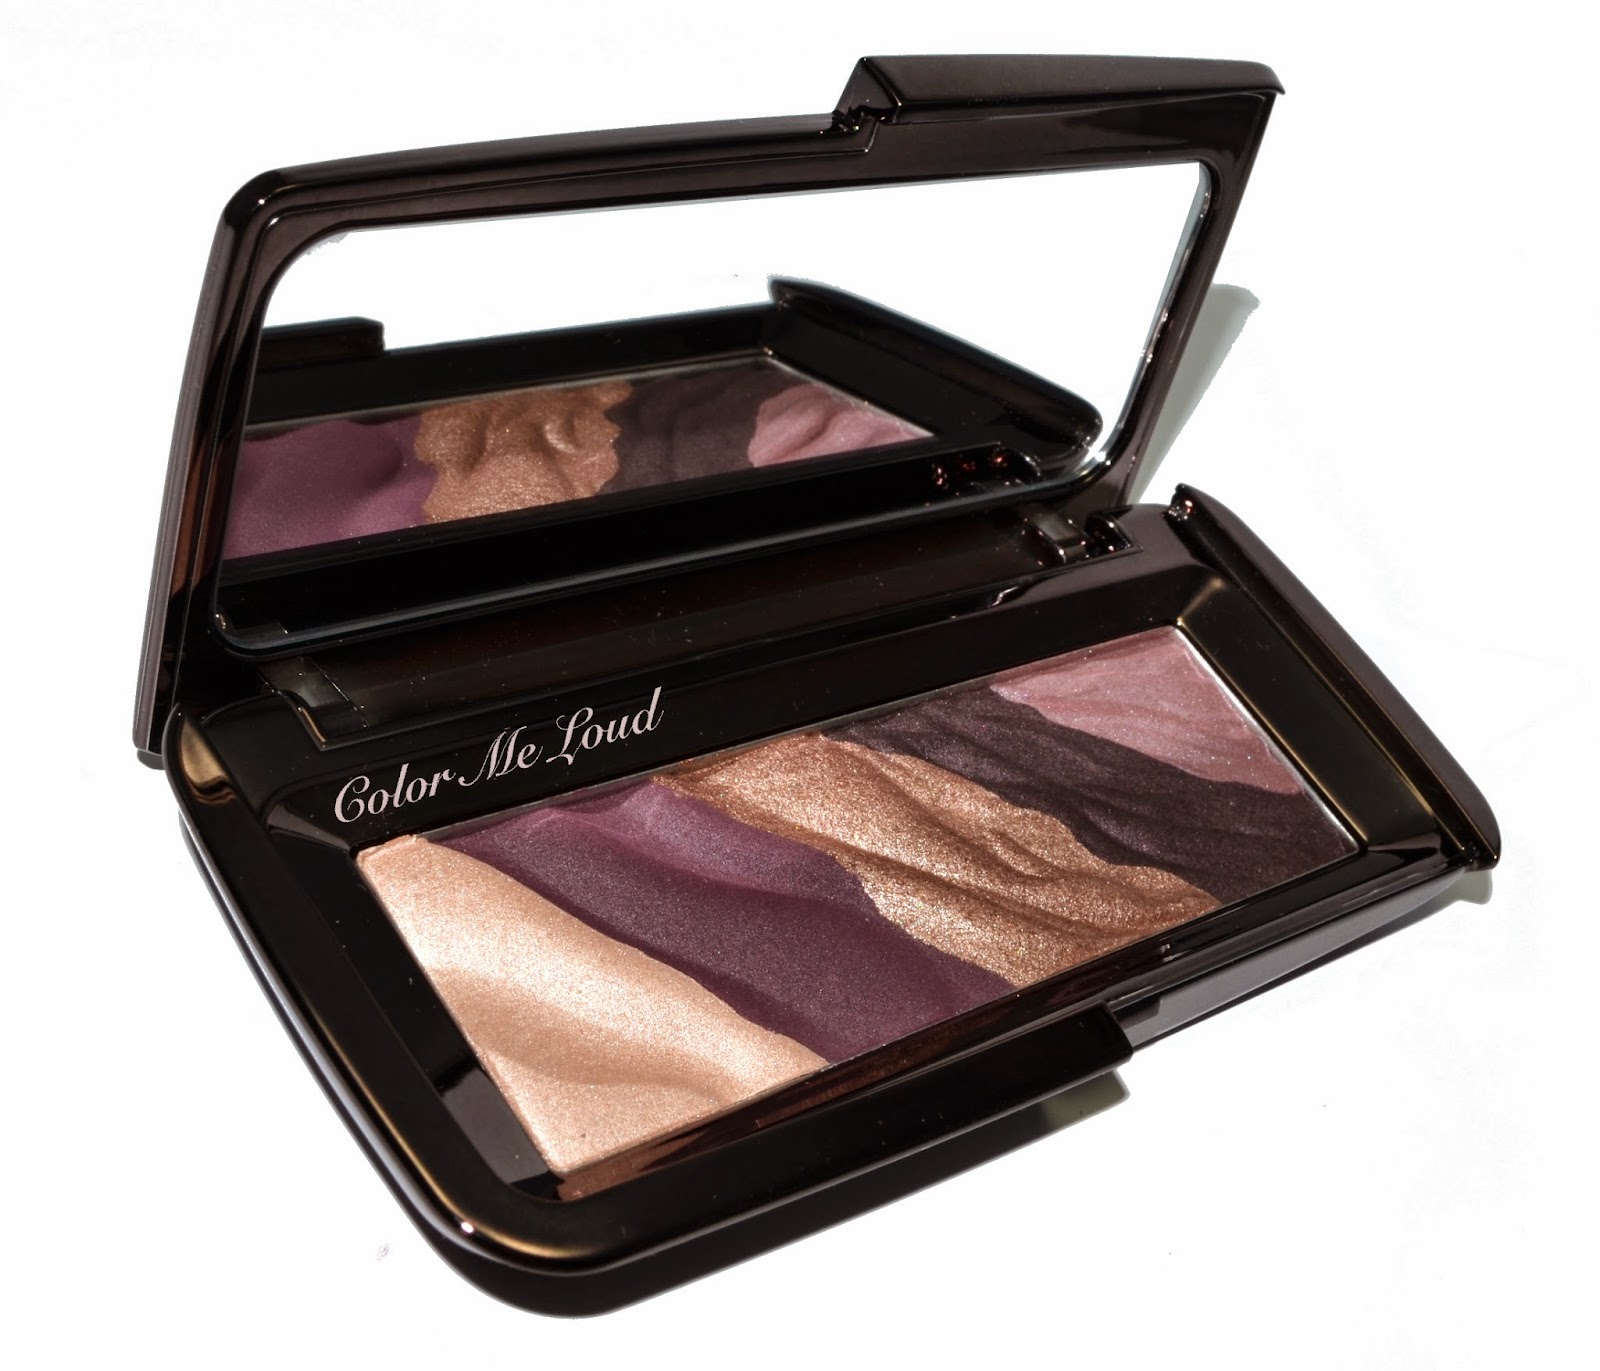 Hourglass Modernist Eye Shadow Palette in Exposure, Review, Swatch & FOTD